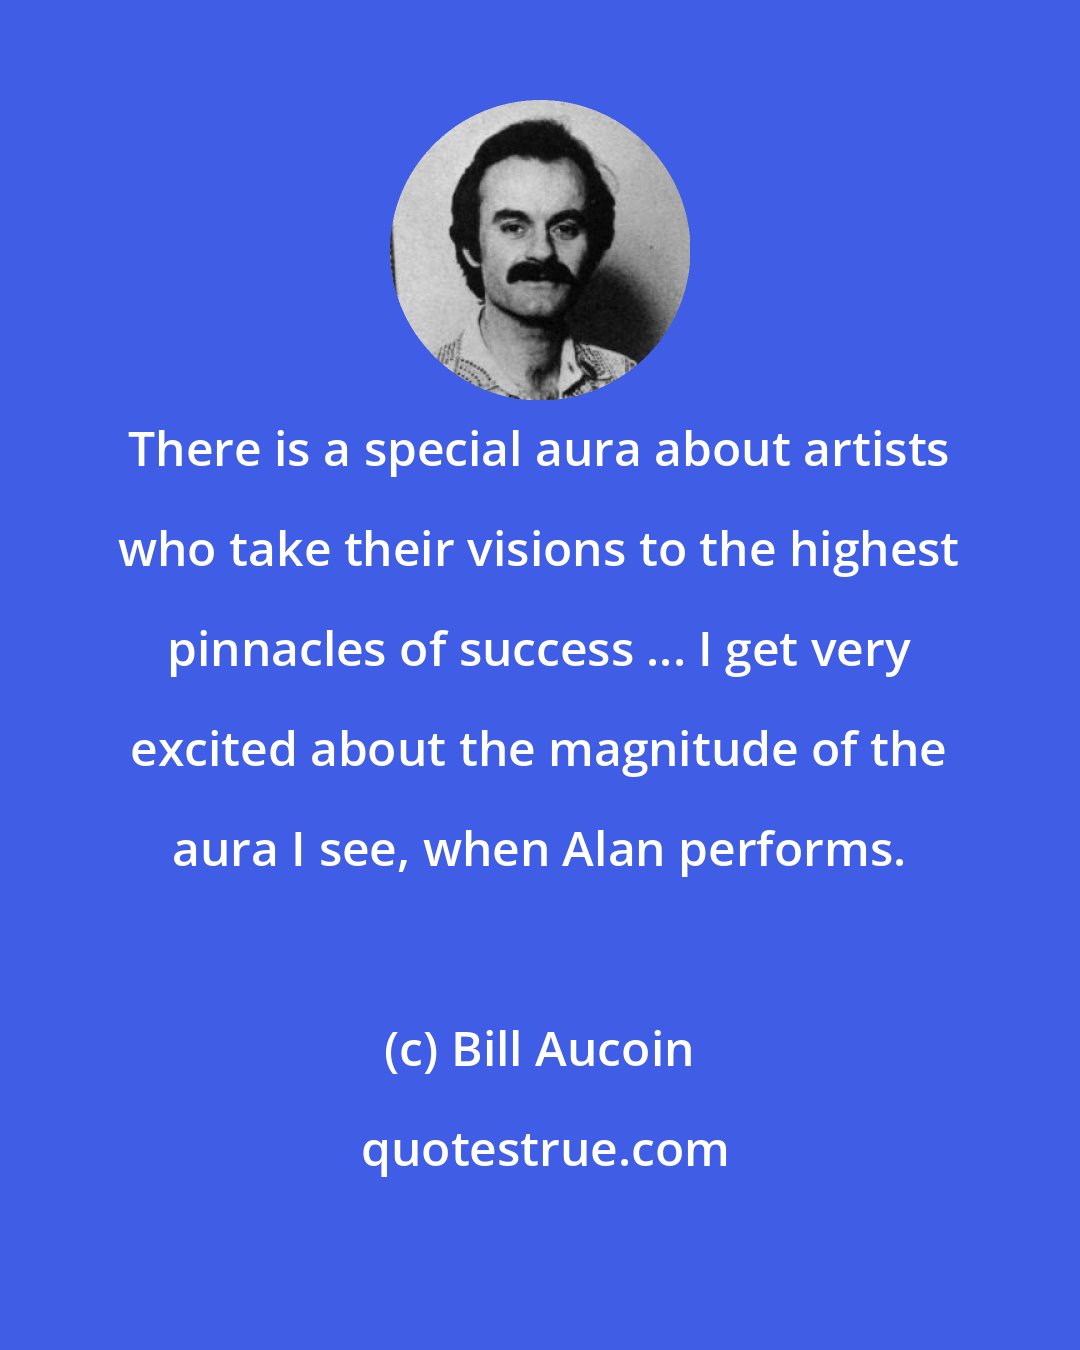 Bill Aucoin: There is a special aura about artists who take their visions to the highest pinnacles of success ... I get very excited about the magnitude of the aura I see, when Alan performs.